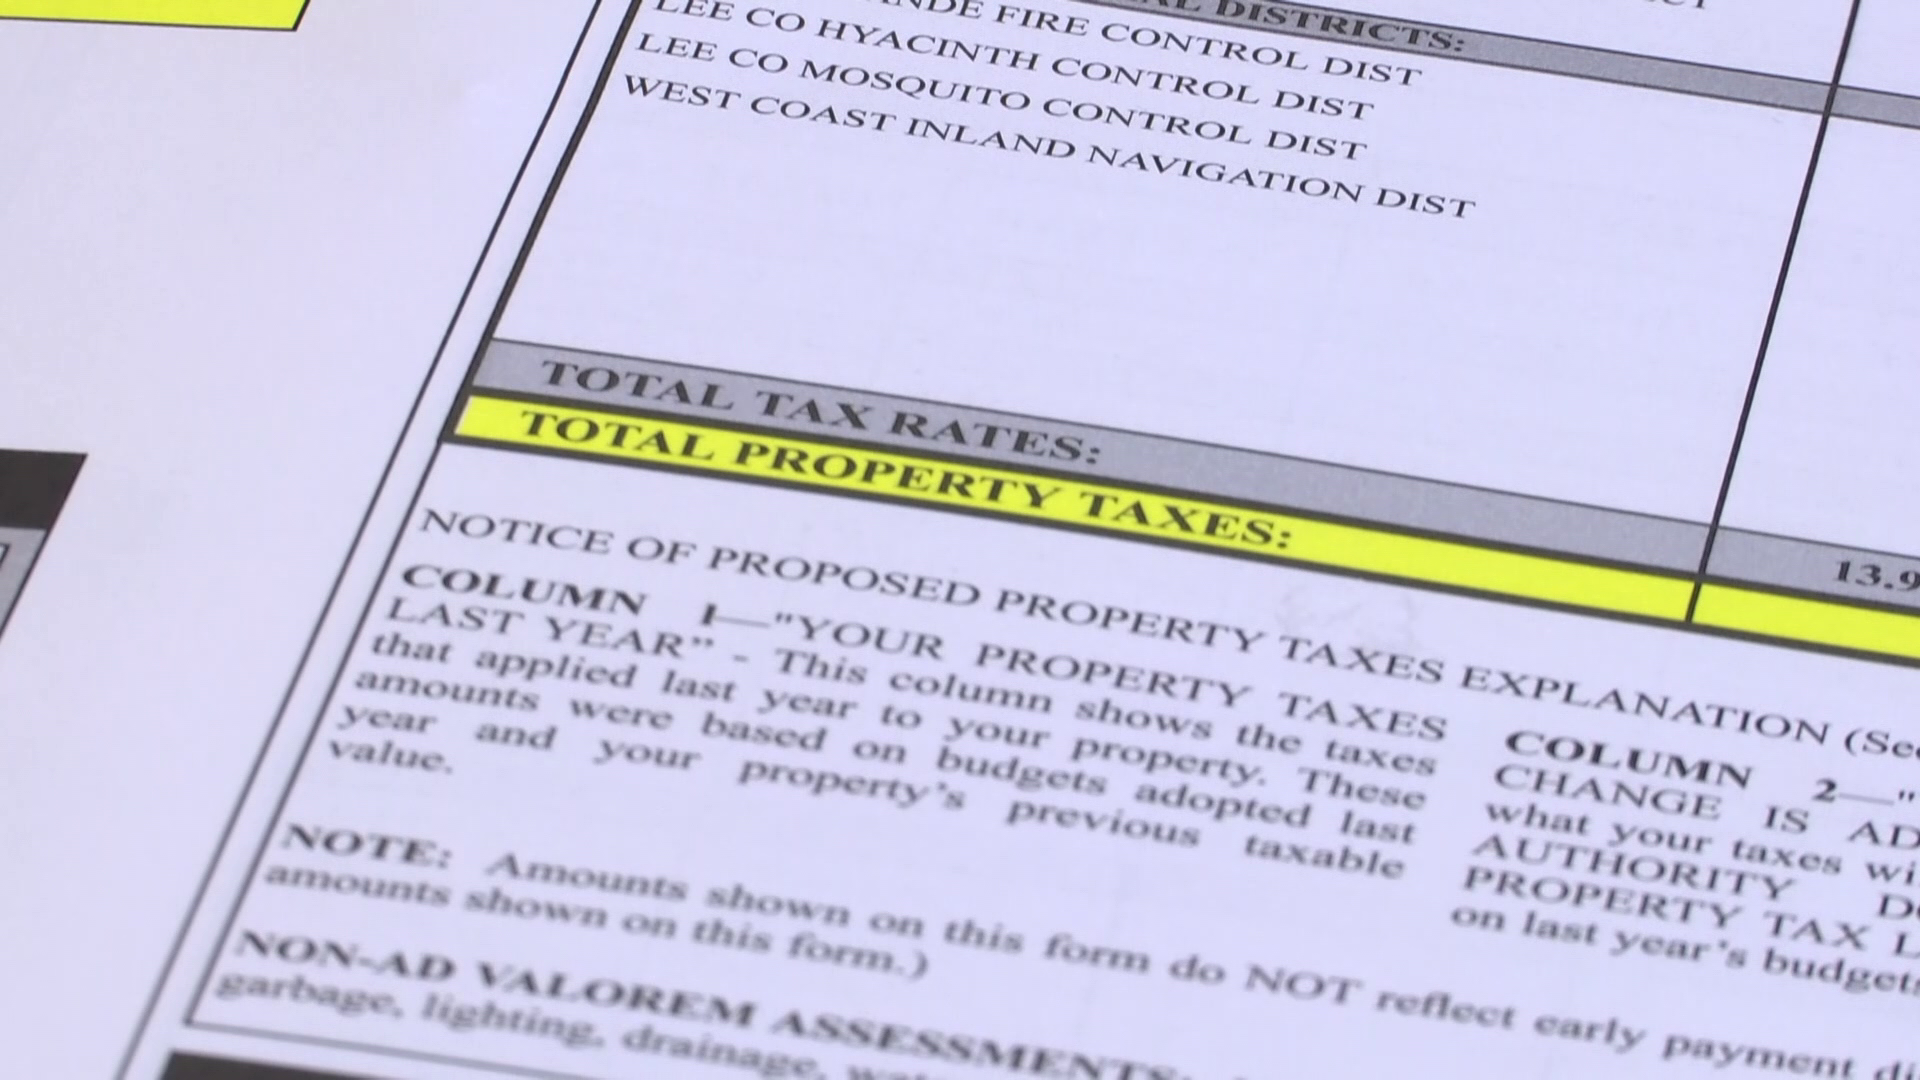 Homeowners in Lee County hit with increased property tax bills